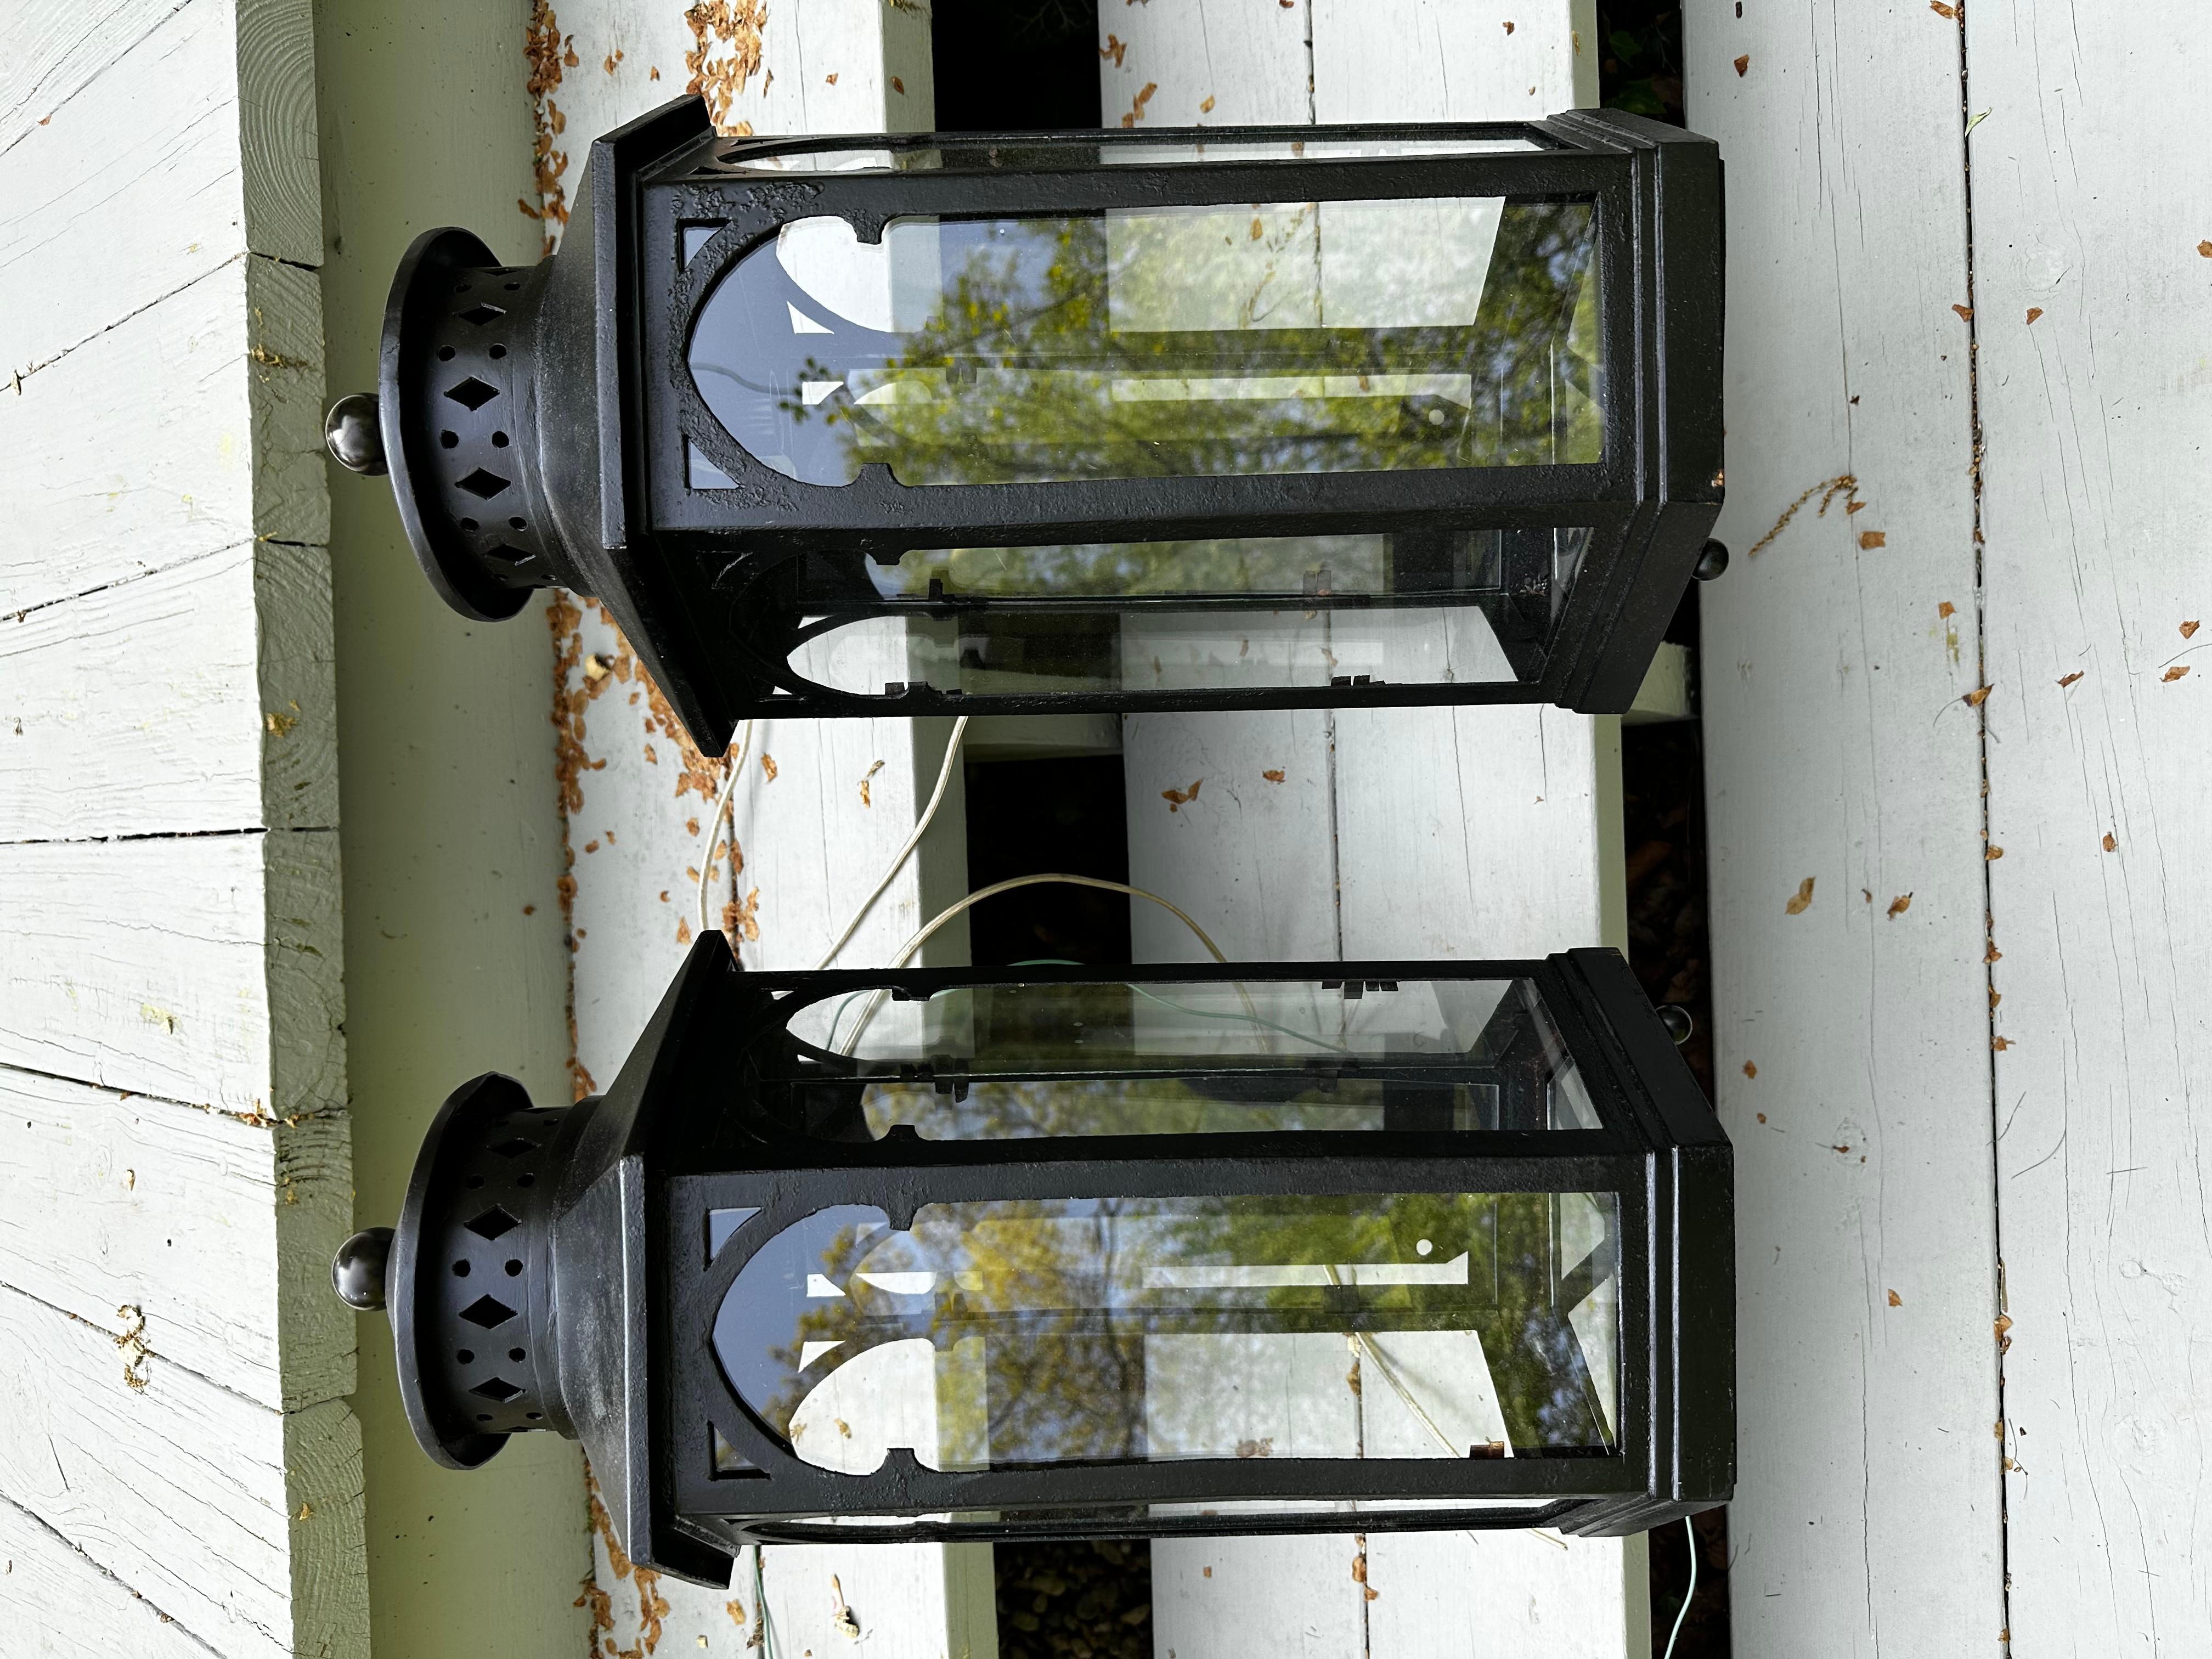 Old Lights On is pleased to offer this pair of cast-iron exterior wall sconces. They have been fully restored and rewired and are ready to install. We ship everywhere. They are in excellent condition with new sockets. Follow us here for more great